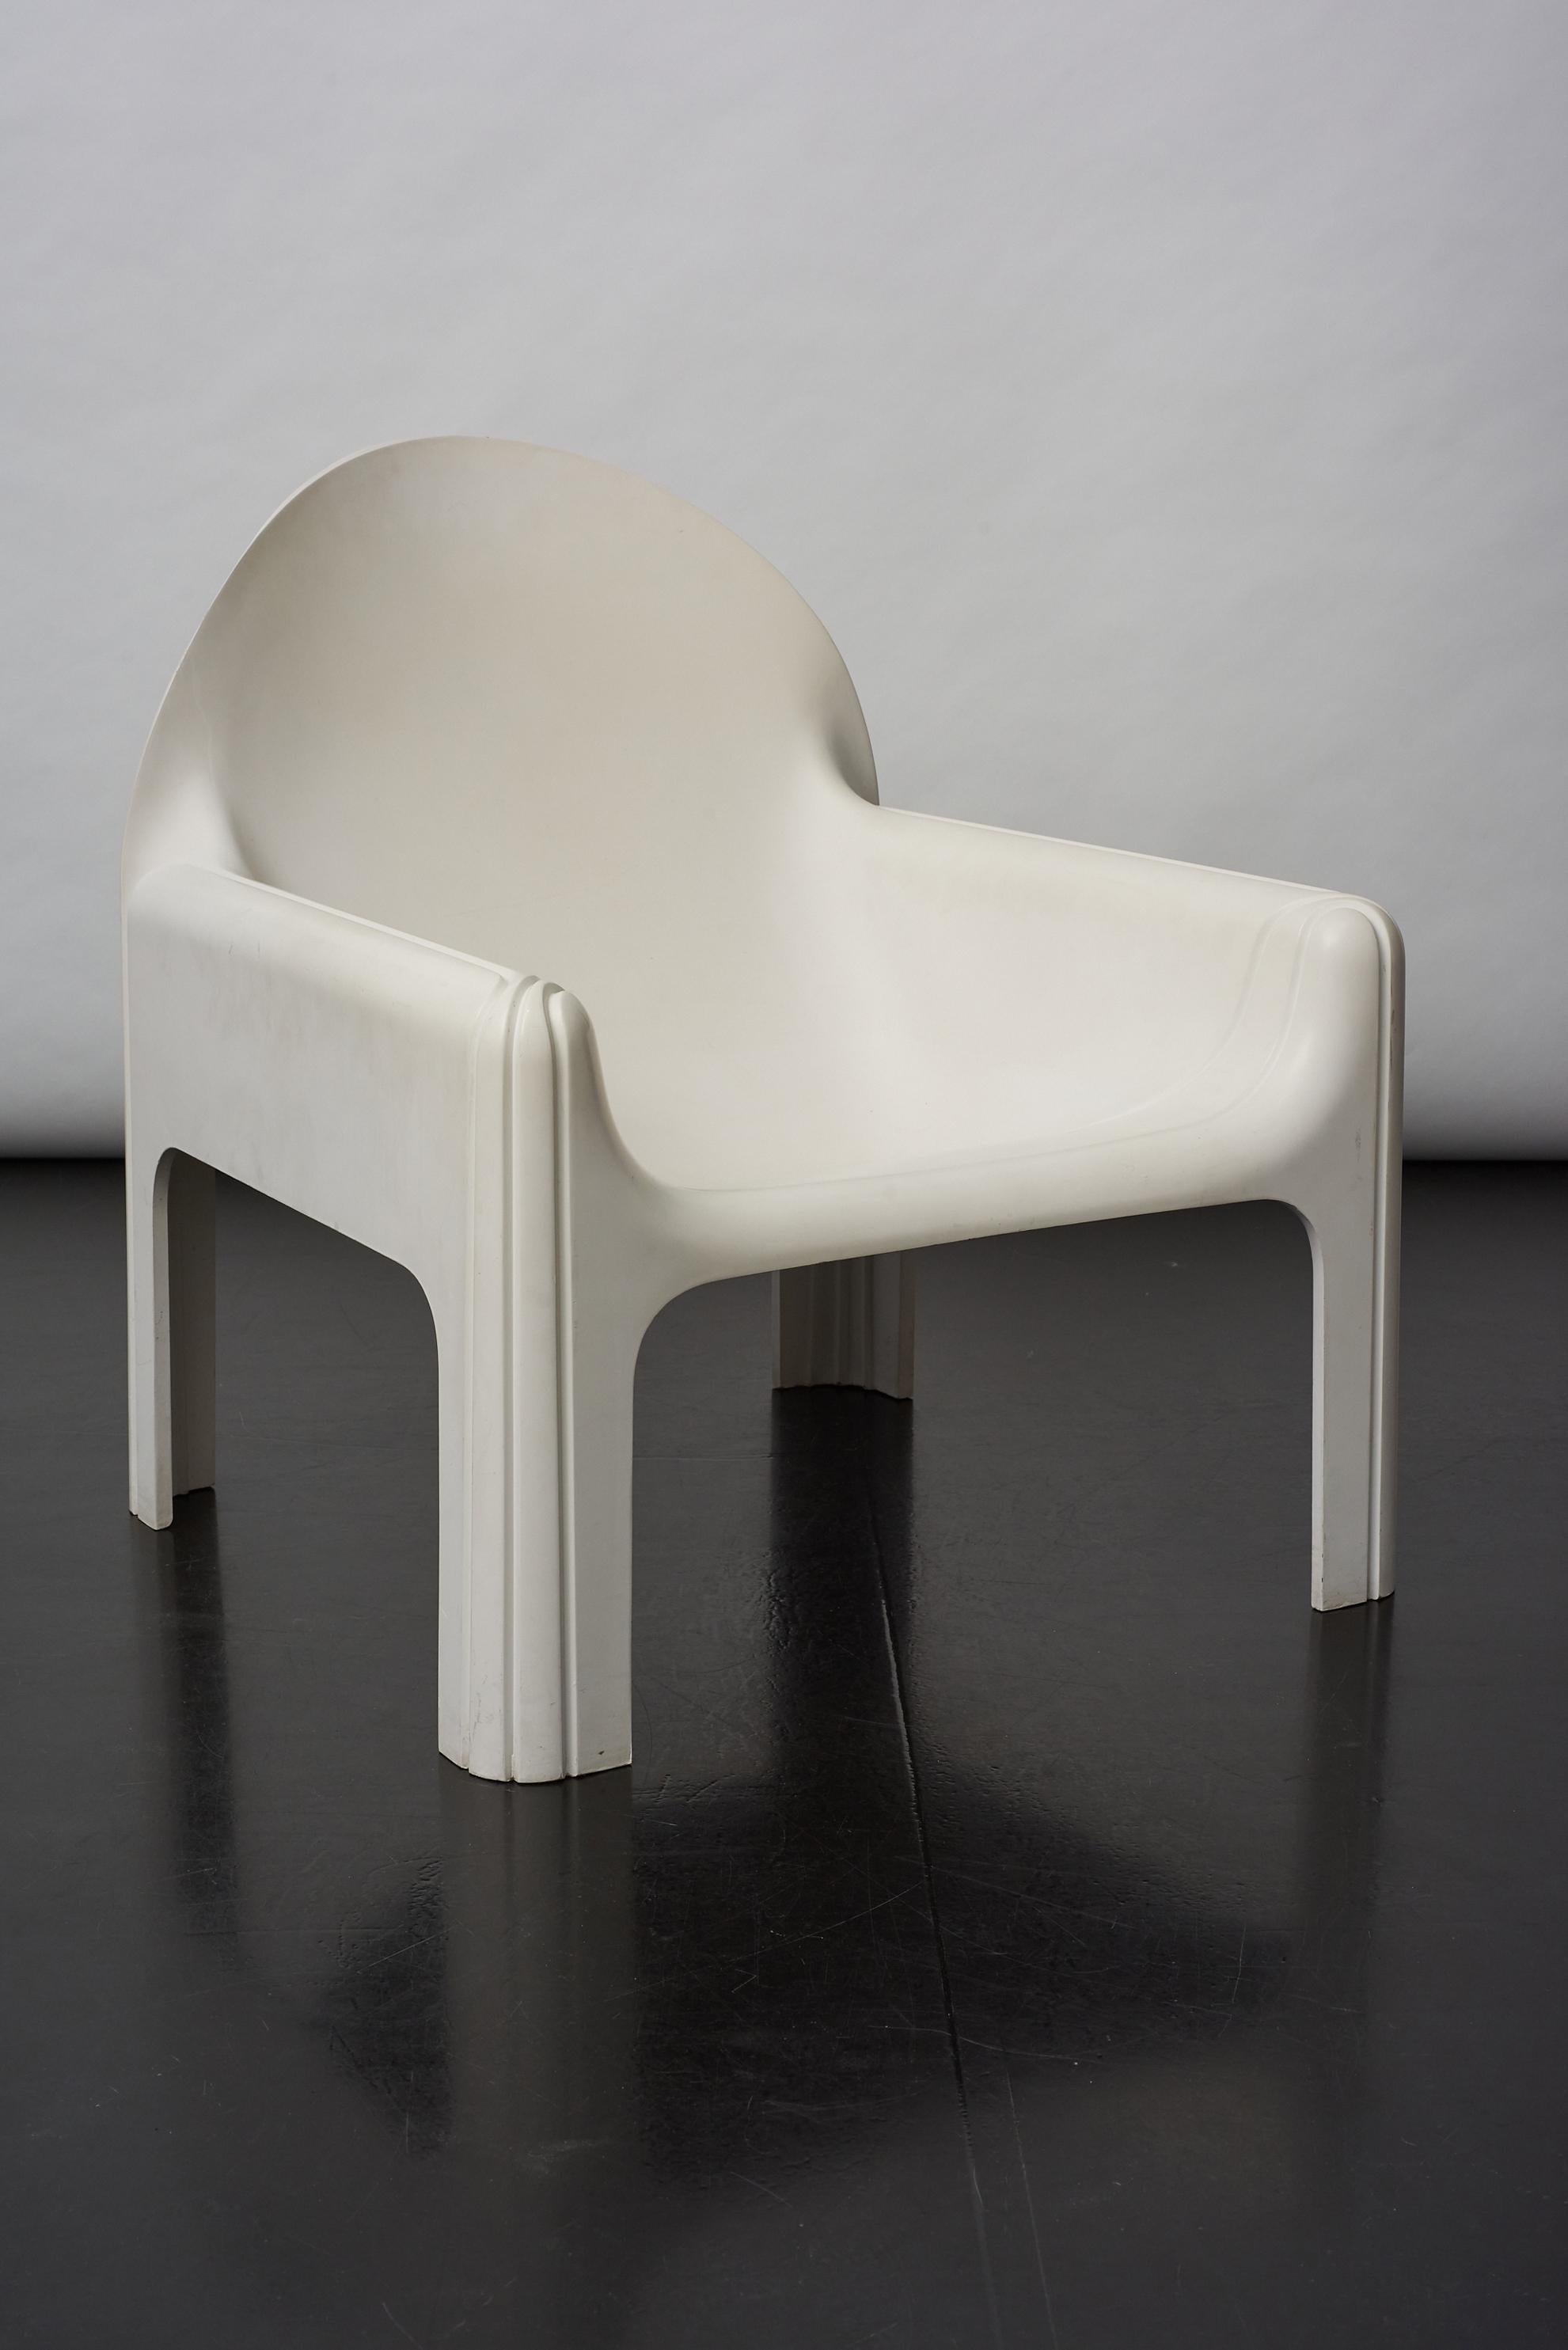 Late 20th Century Kartell Lounge Chair 4794 Designed by Gae Aulenti, 1974